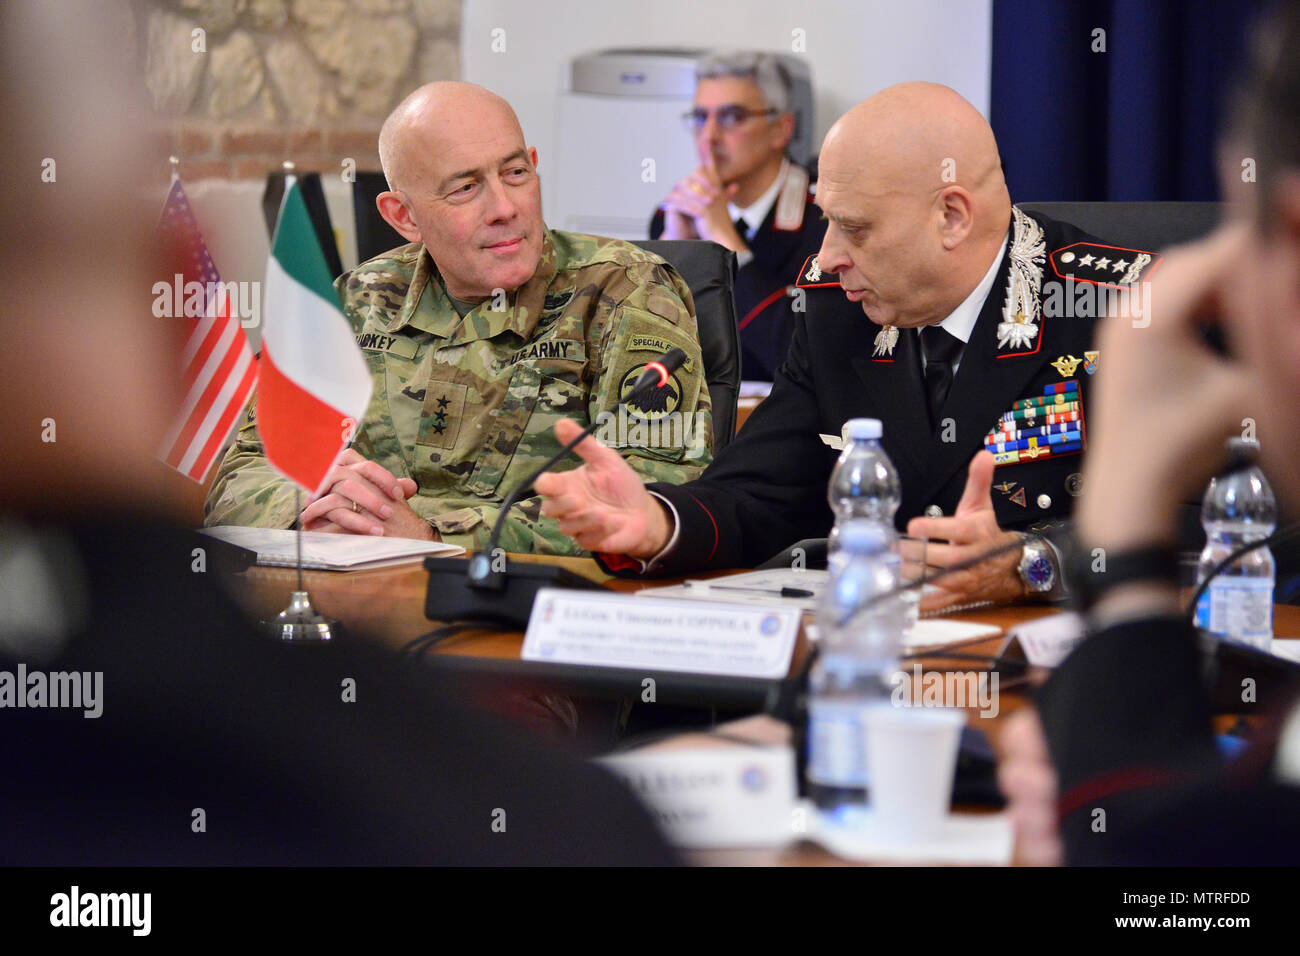 Lt. Gen Vincenzo Coppola (left), Commanding General “Palidoro” Carabinieri Specialized and Mobile Units, talk with Lt. Gen. Charles D. Luckey (left), Commanding General U.S. Army Reserve Command, during the visit at Center of Excellence for Stability Police Units (CoESPU) Vicenza, Italy, January 20, 2017.(U.S. Army Photo by Visual Information Specialist Paolo Bovo/released) Stock Photo